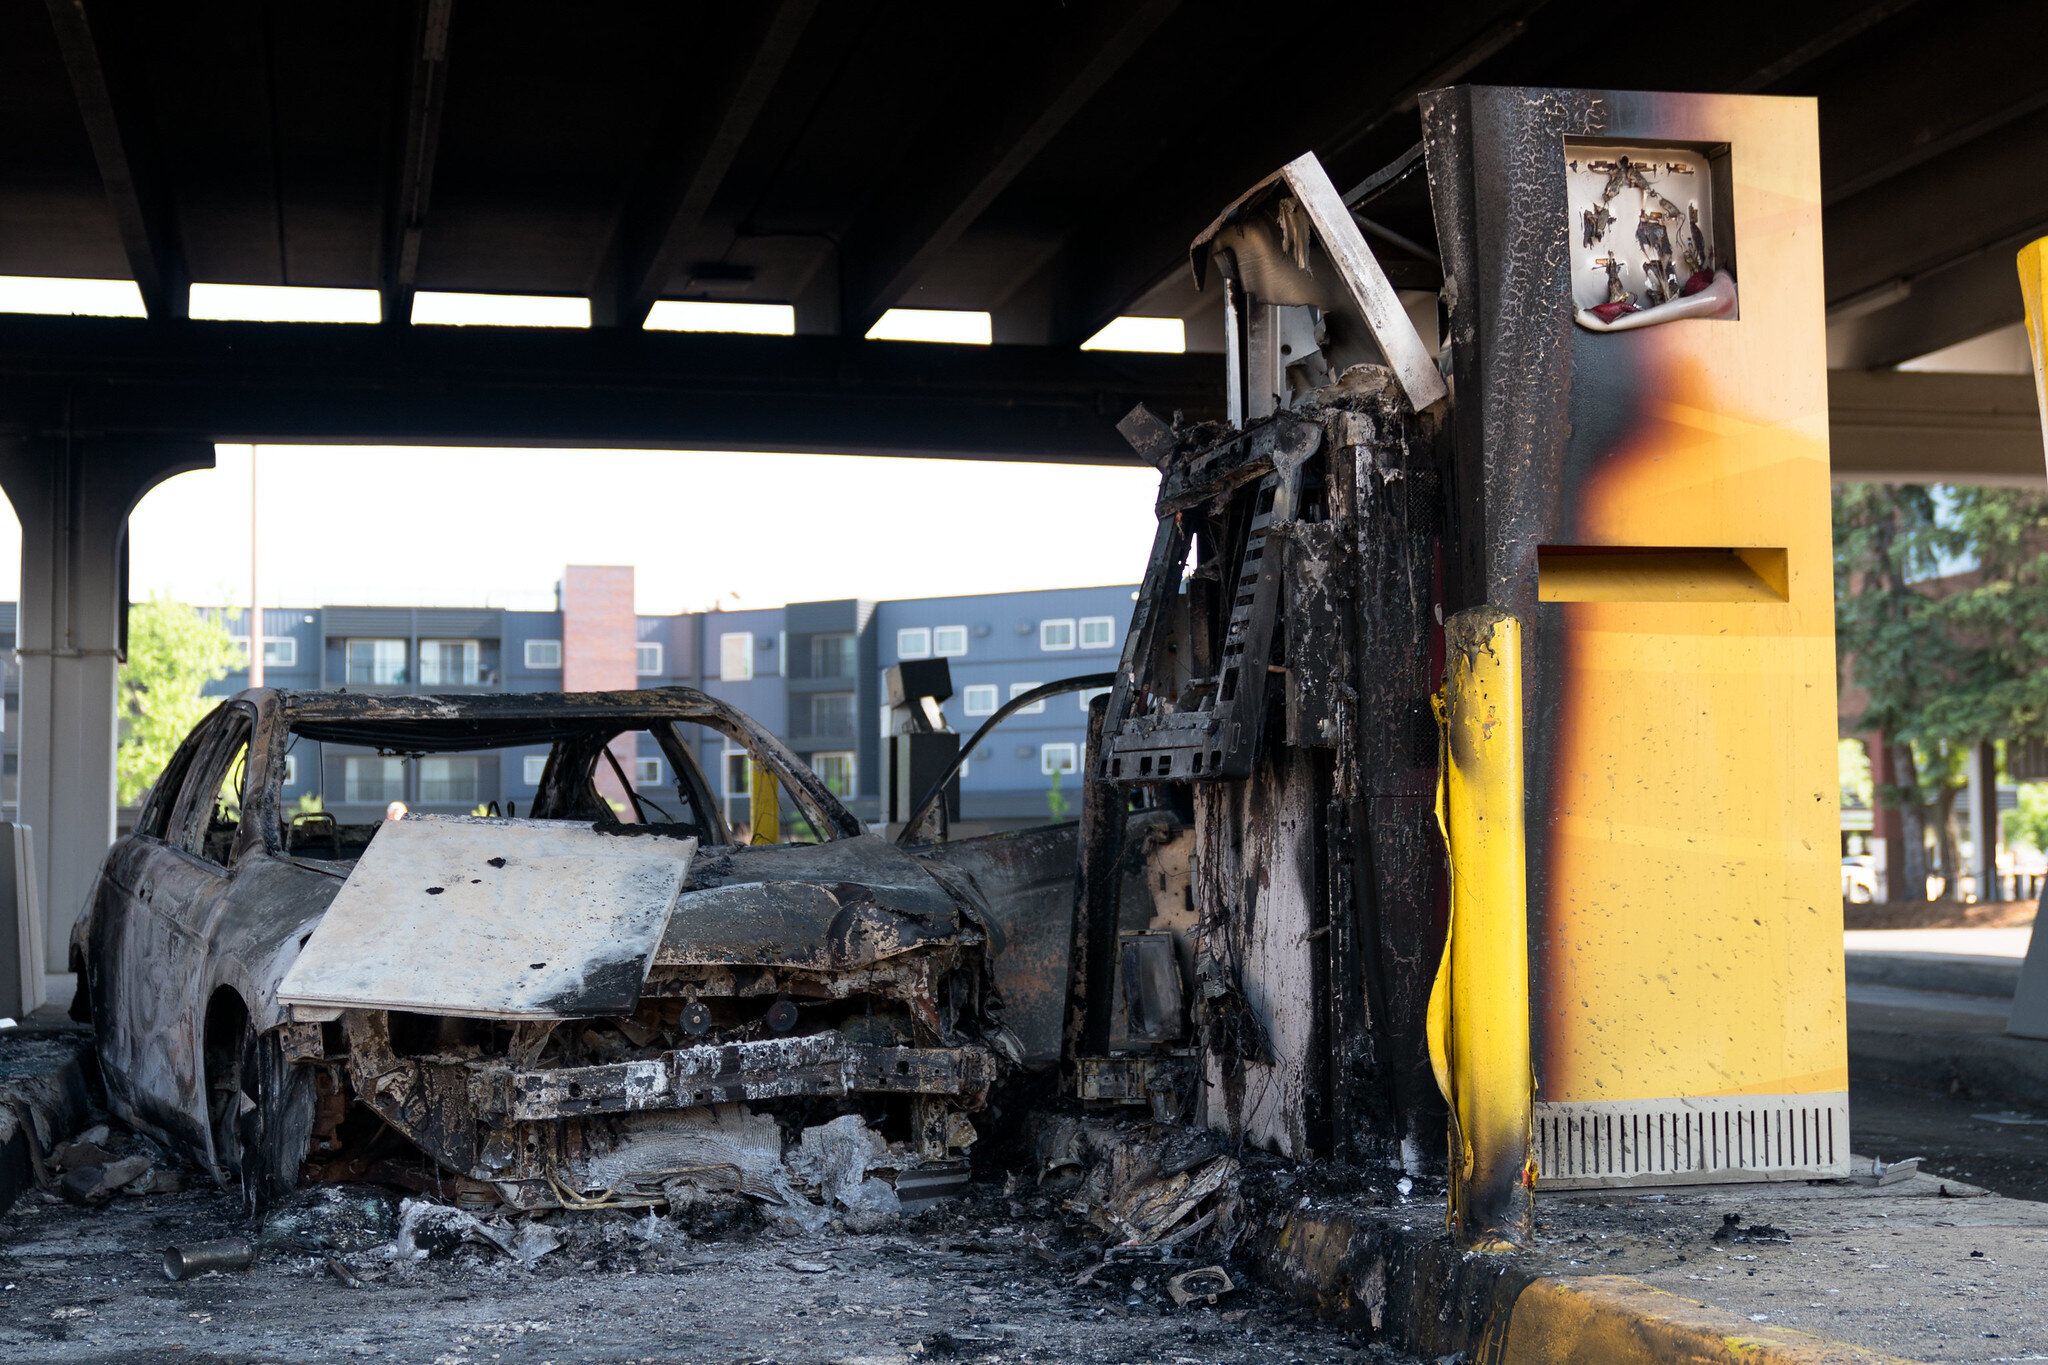  A burned out car and ATM drive thru machine at Wells Fargo Bank on Saturday morning after they were destroyed by rioters on Friday night in Minneapolis, Minnesota 